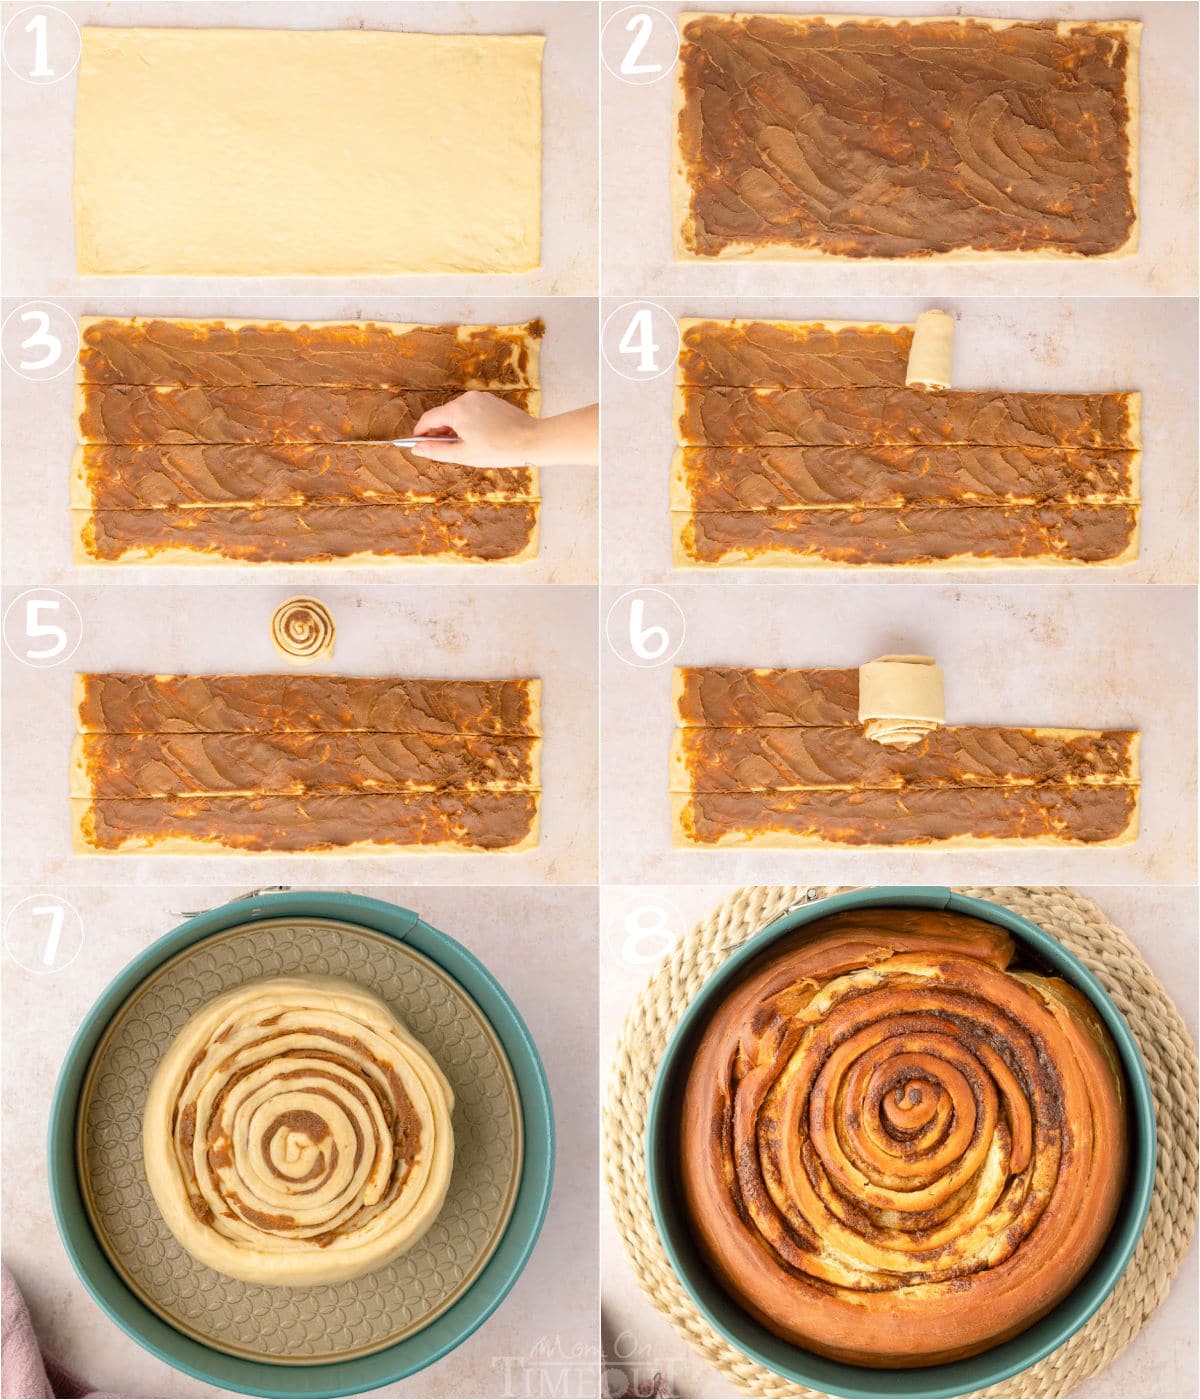 eight image collage showing how to assemble the cinnamon roll cake step by step.